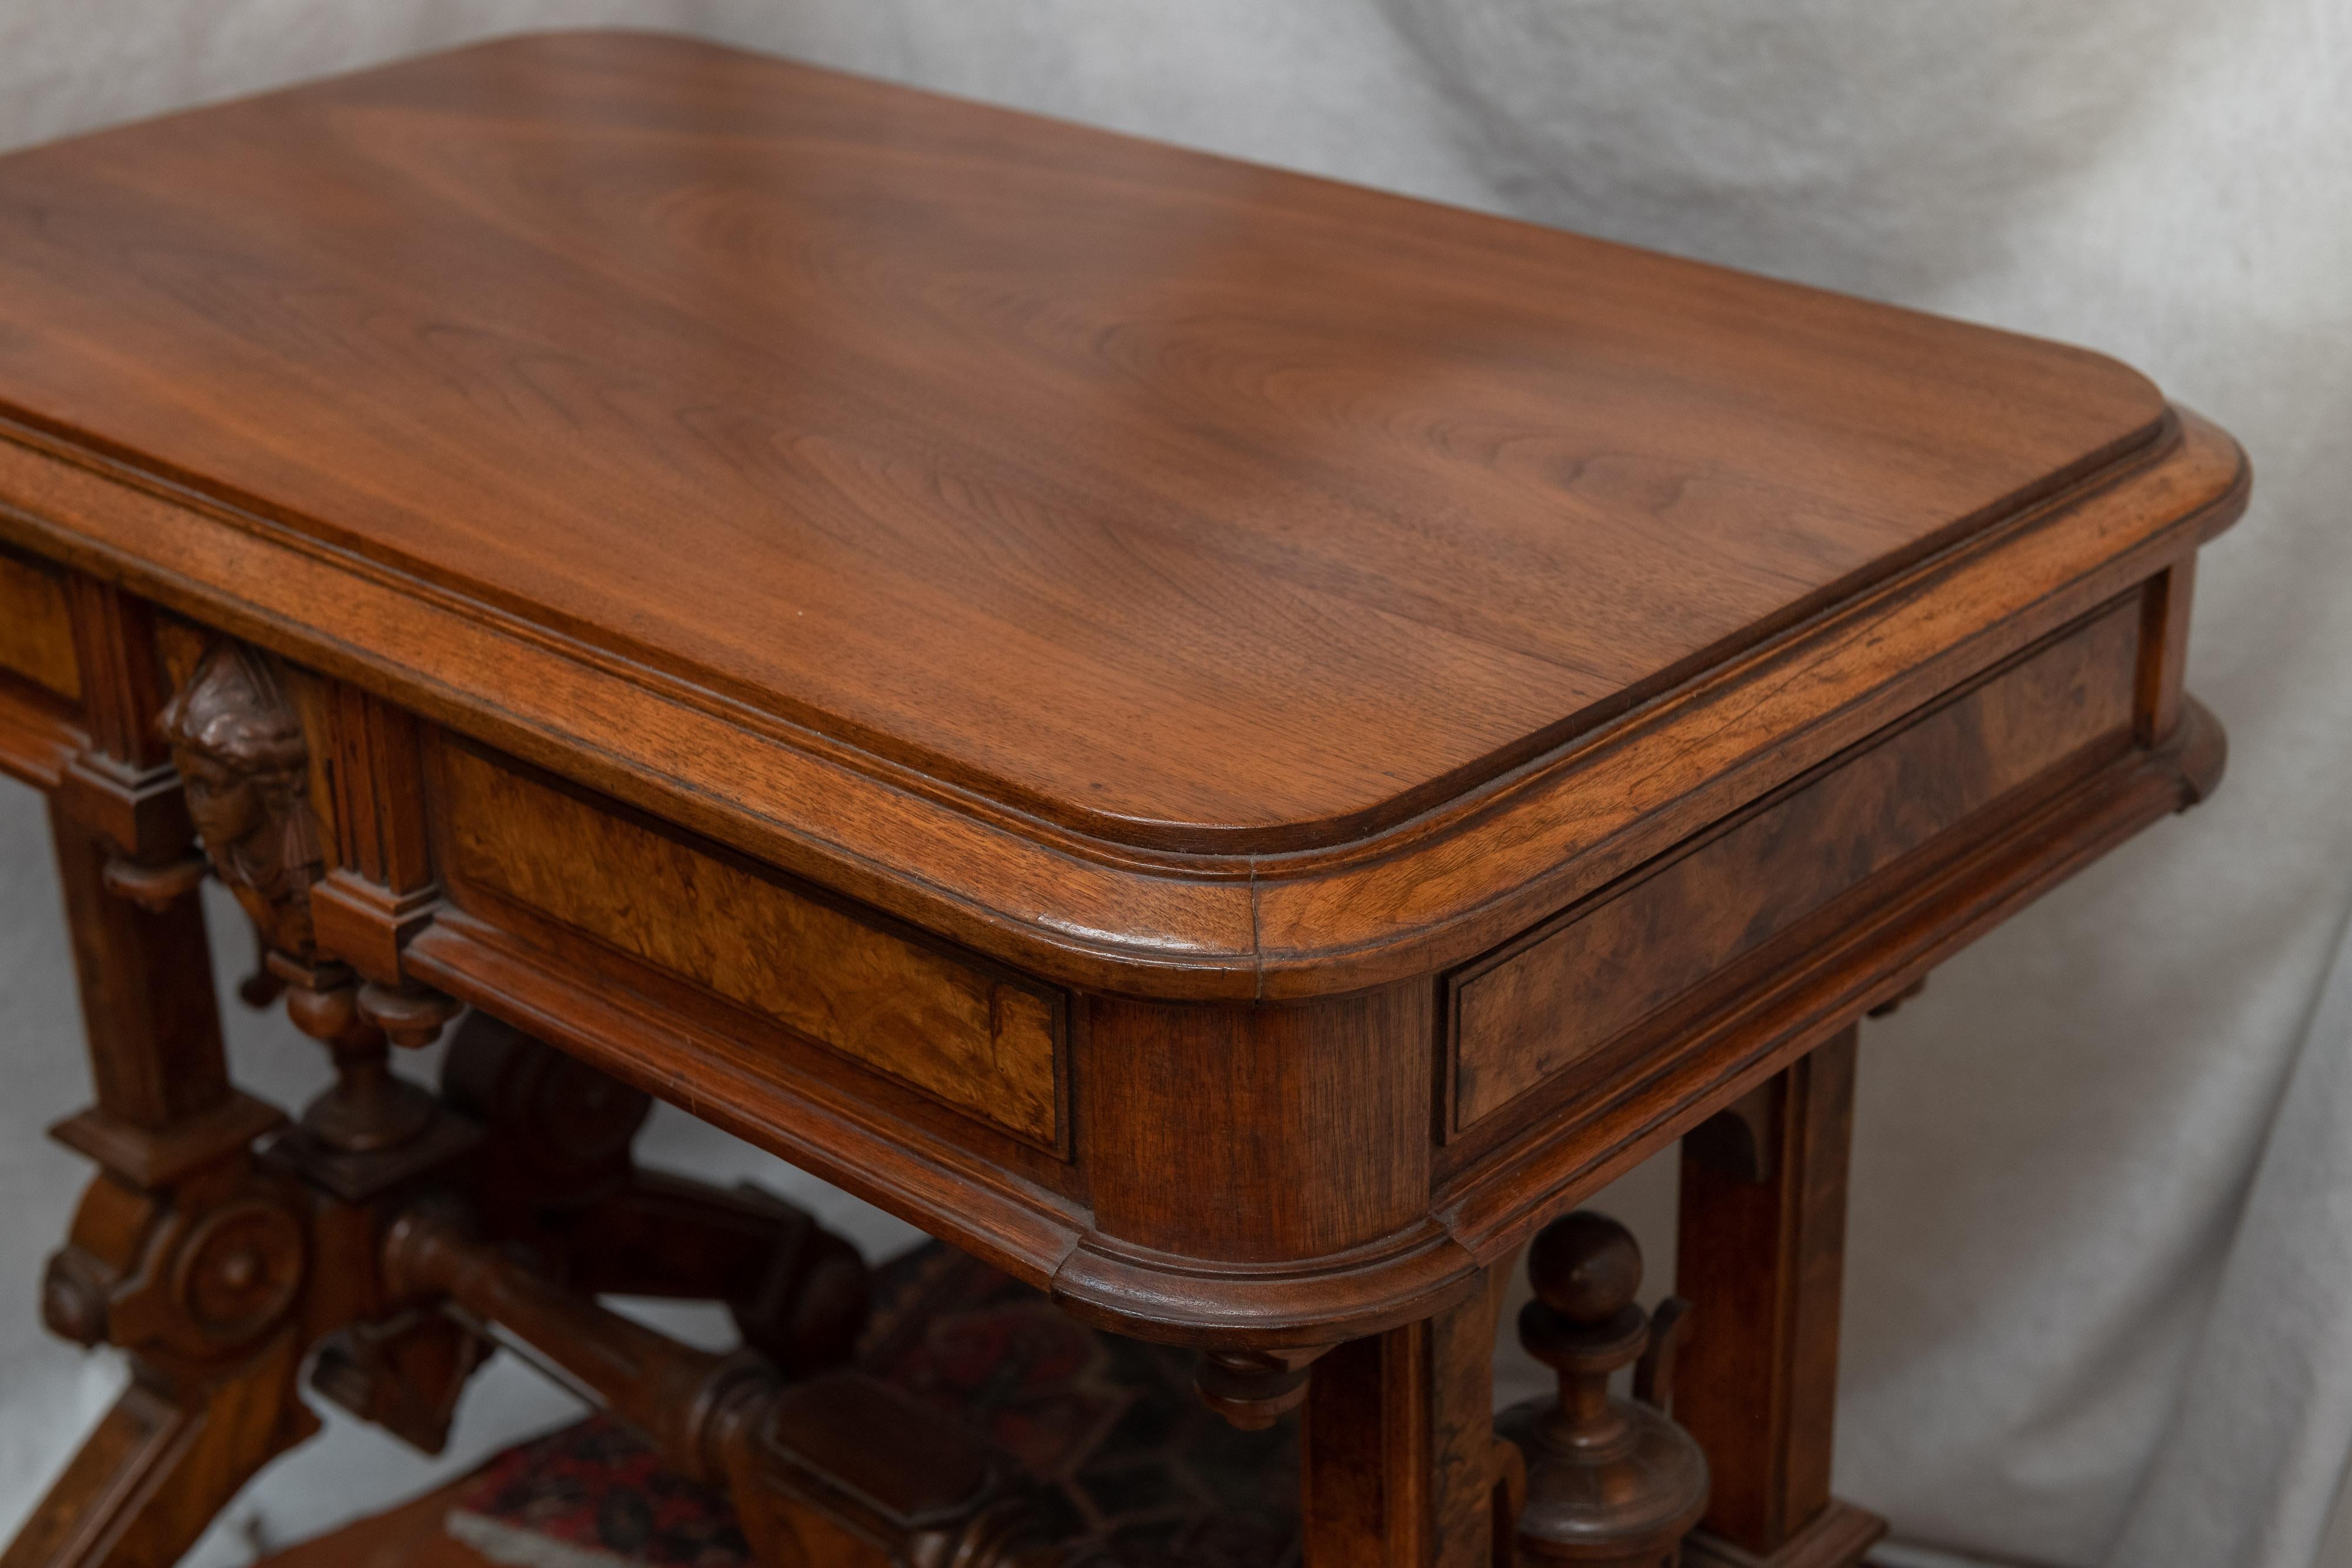 Of the 3 main periods of Victorian furniture, Renaissance Revival is generally held as the most sought after. This beautiful library table has been French polished by our master restorer. It glows with a hand rubbed finish. To describe each detail